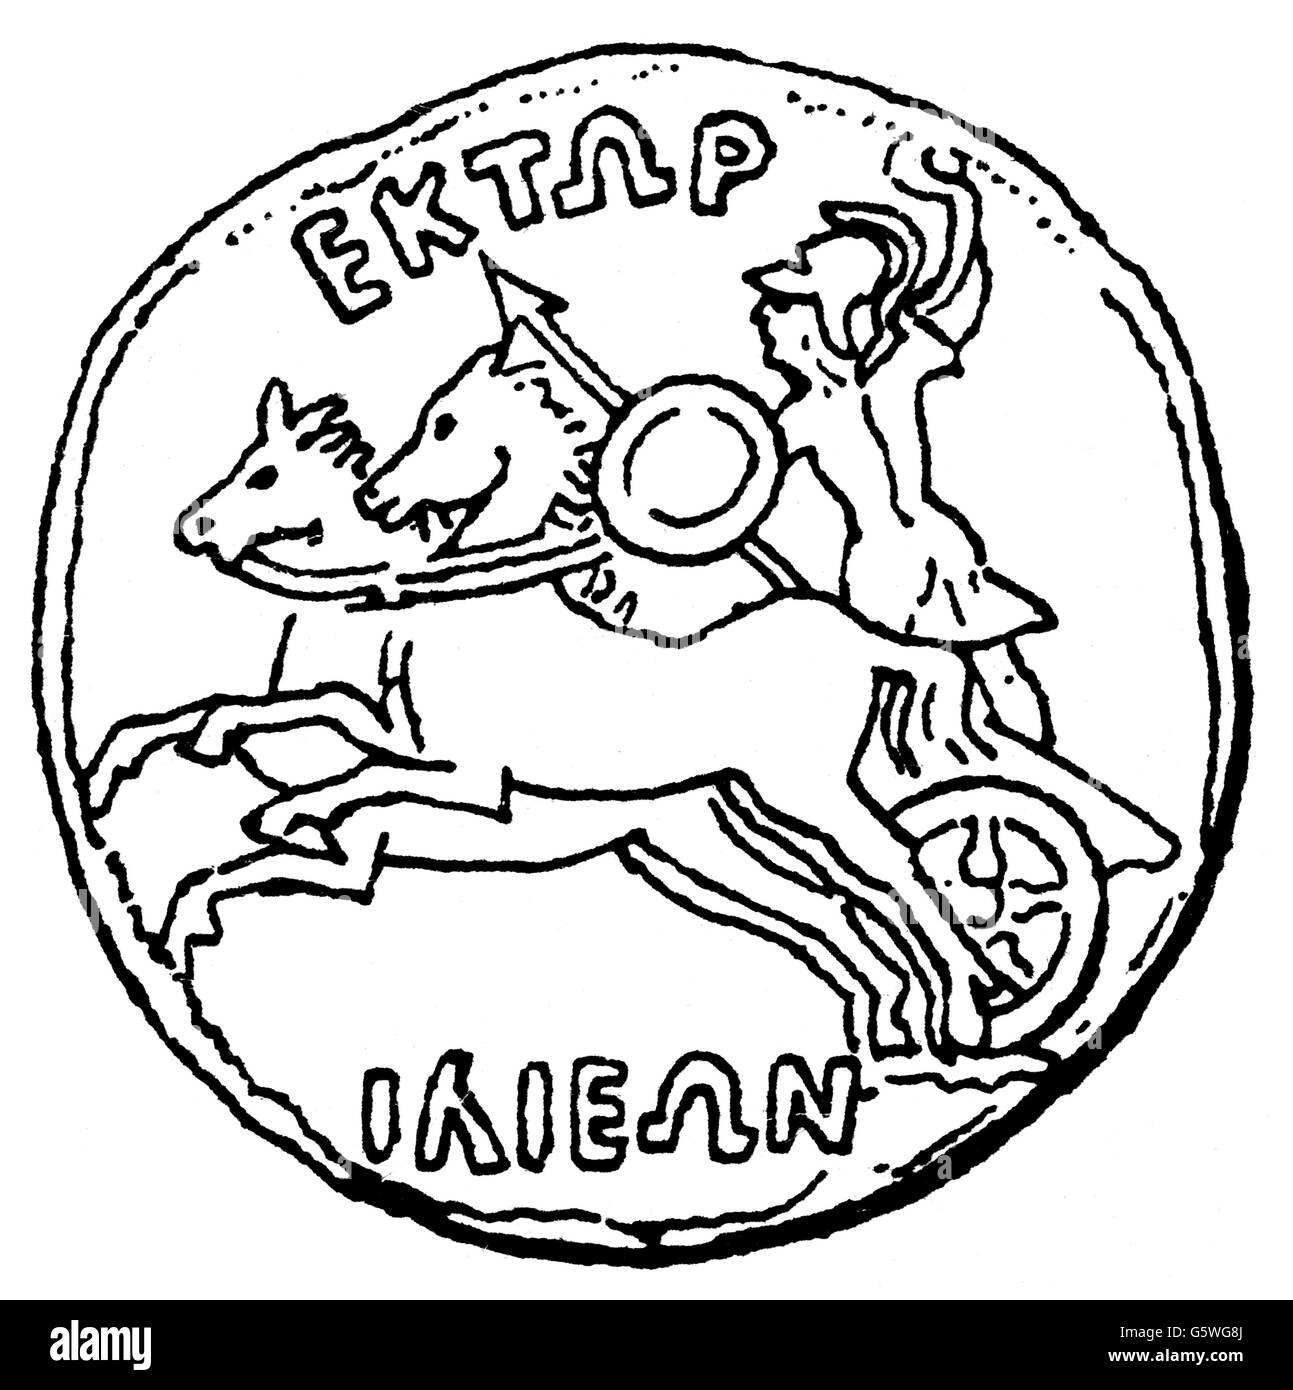 money / finances, coins, ancient world, Greece, coin with the picture of Hector on the chariot, Troy, wood engraving, ancient world, ancient times, Greek, Grecian, numismatics, Trojan war, Iliad, mythology, hero, heroes, horse, horses, chariot, inscription, epigraphs, inscriptions, coin, coins, historic, historical, people, ancient world, Additional-Rights-Clearences-Not Available Stock Photo